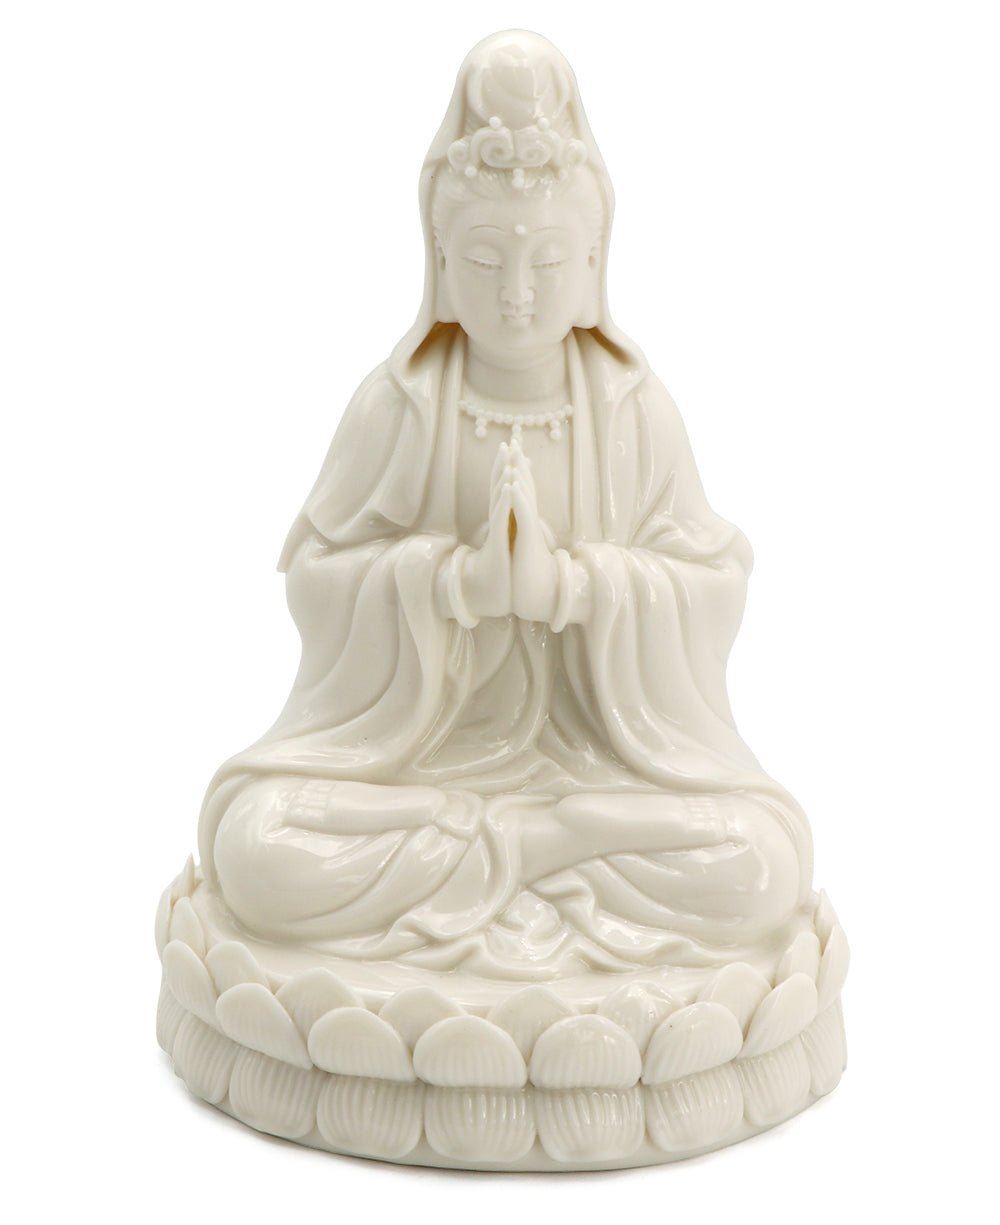 White Porcelain Praying Kuan Yin Statue, 6.5 Inches - Sculptures & Statues